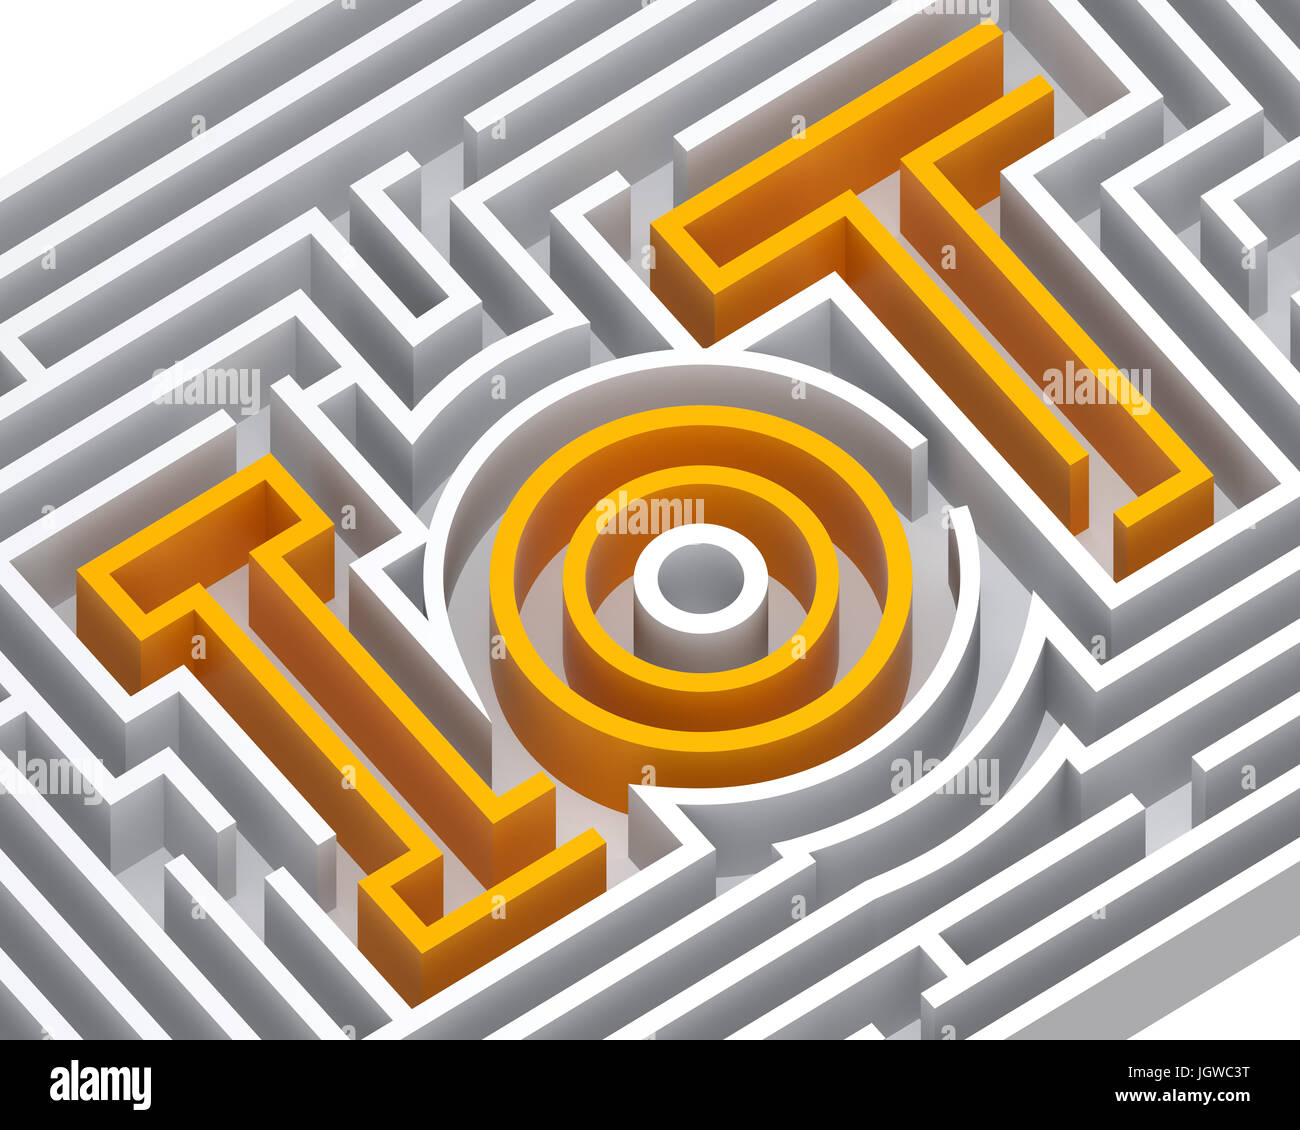 IoT maze graphic. Internet of things concept. 3D rendering image. Stock Photo